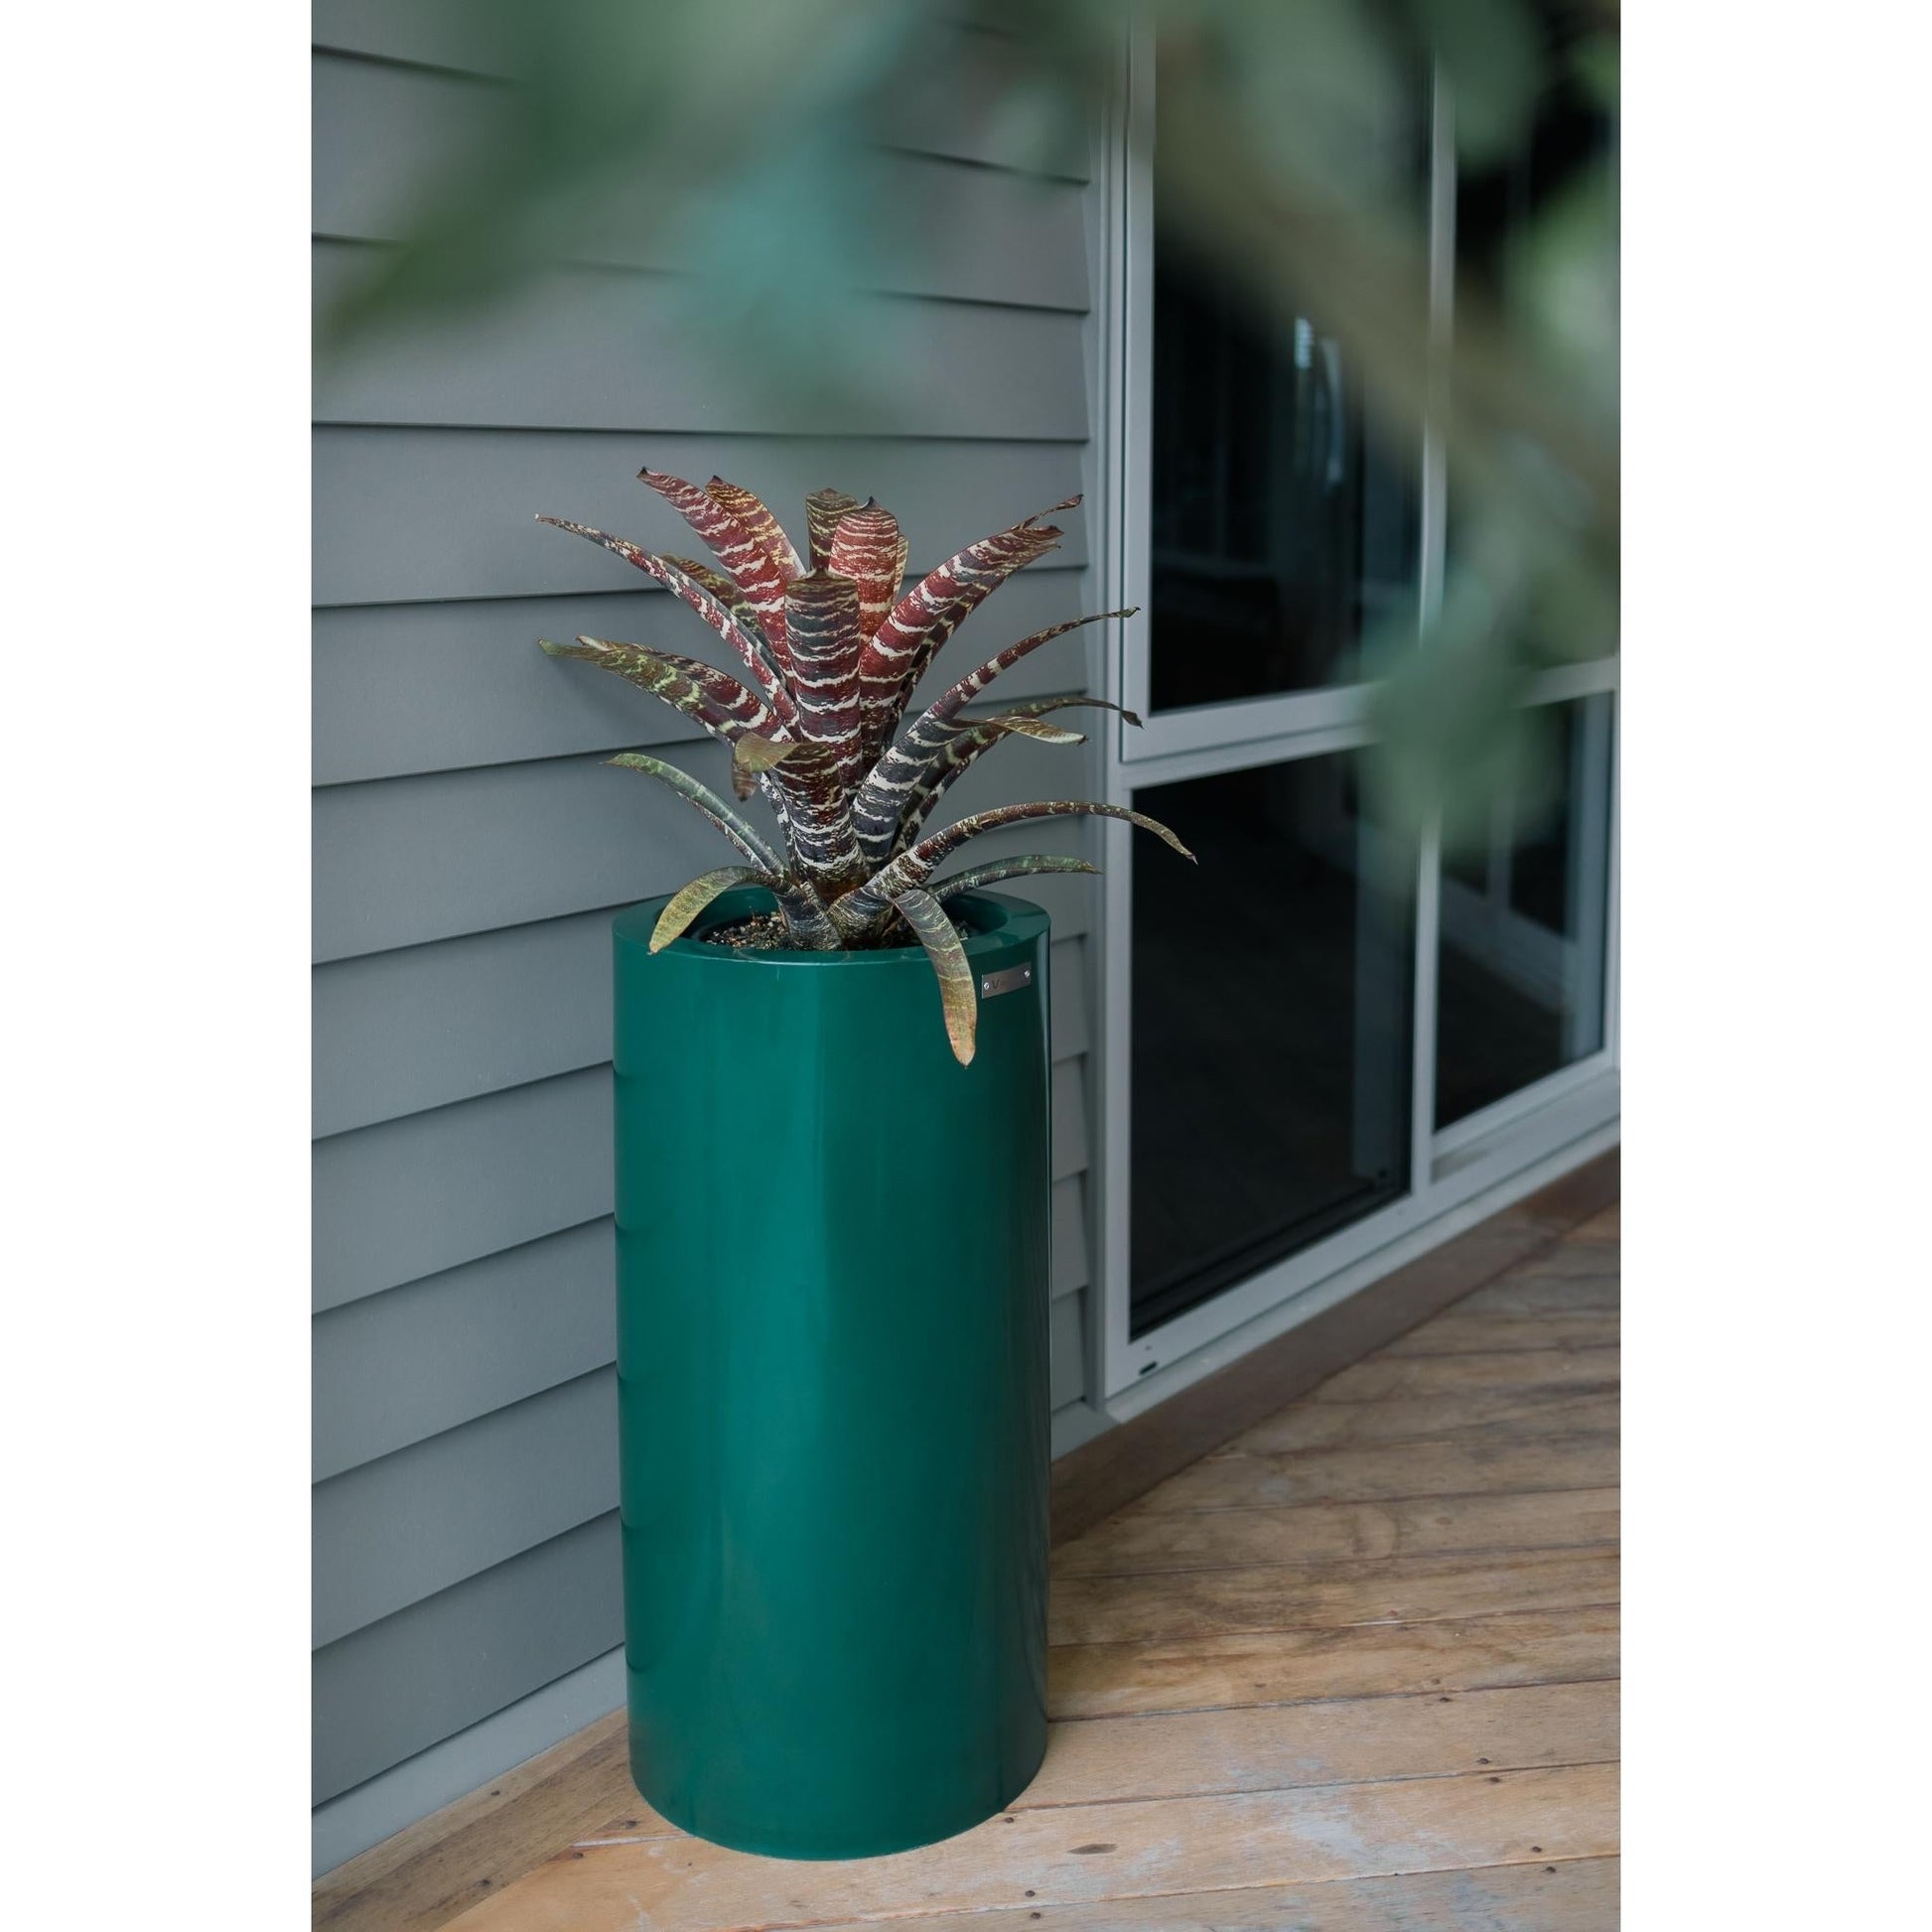 A Modscene cylinder planter in a emerald green colour.